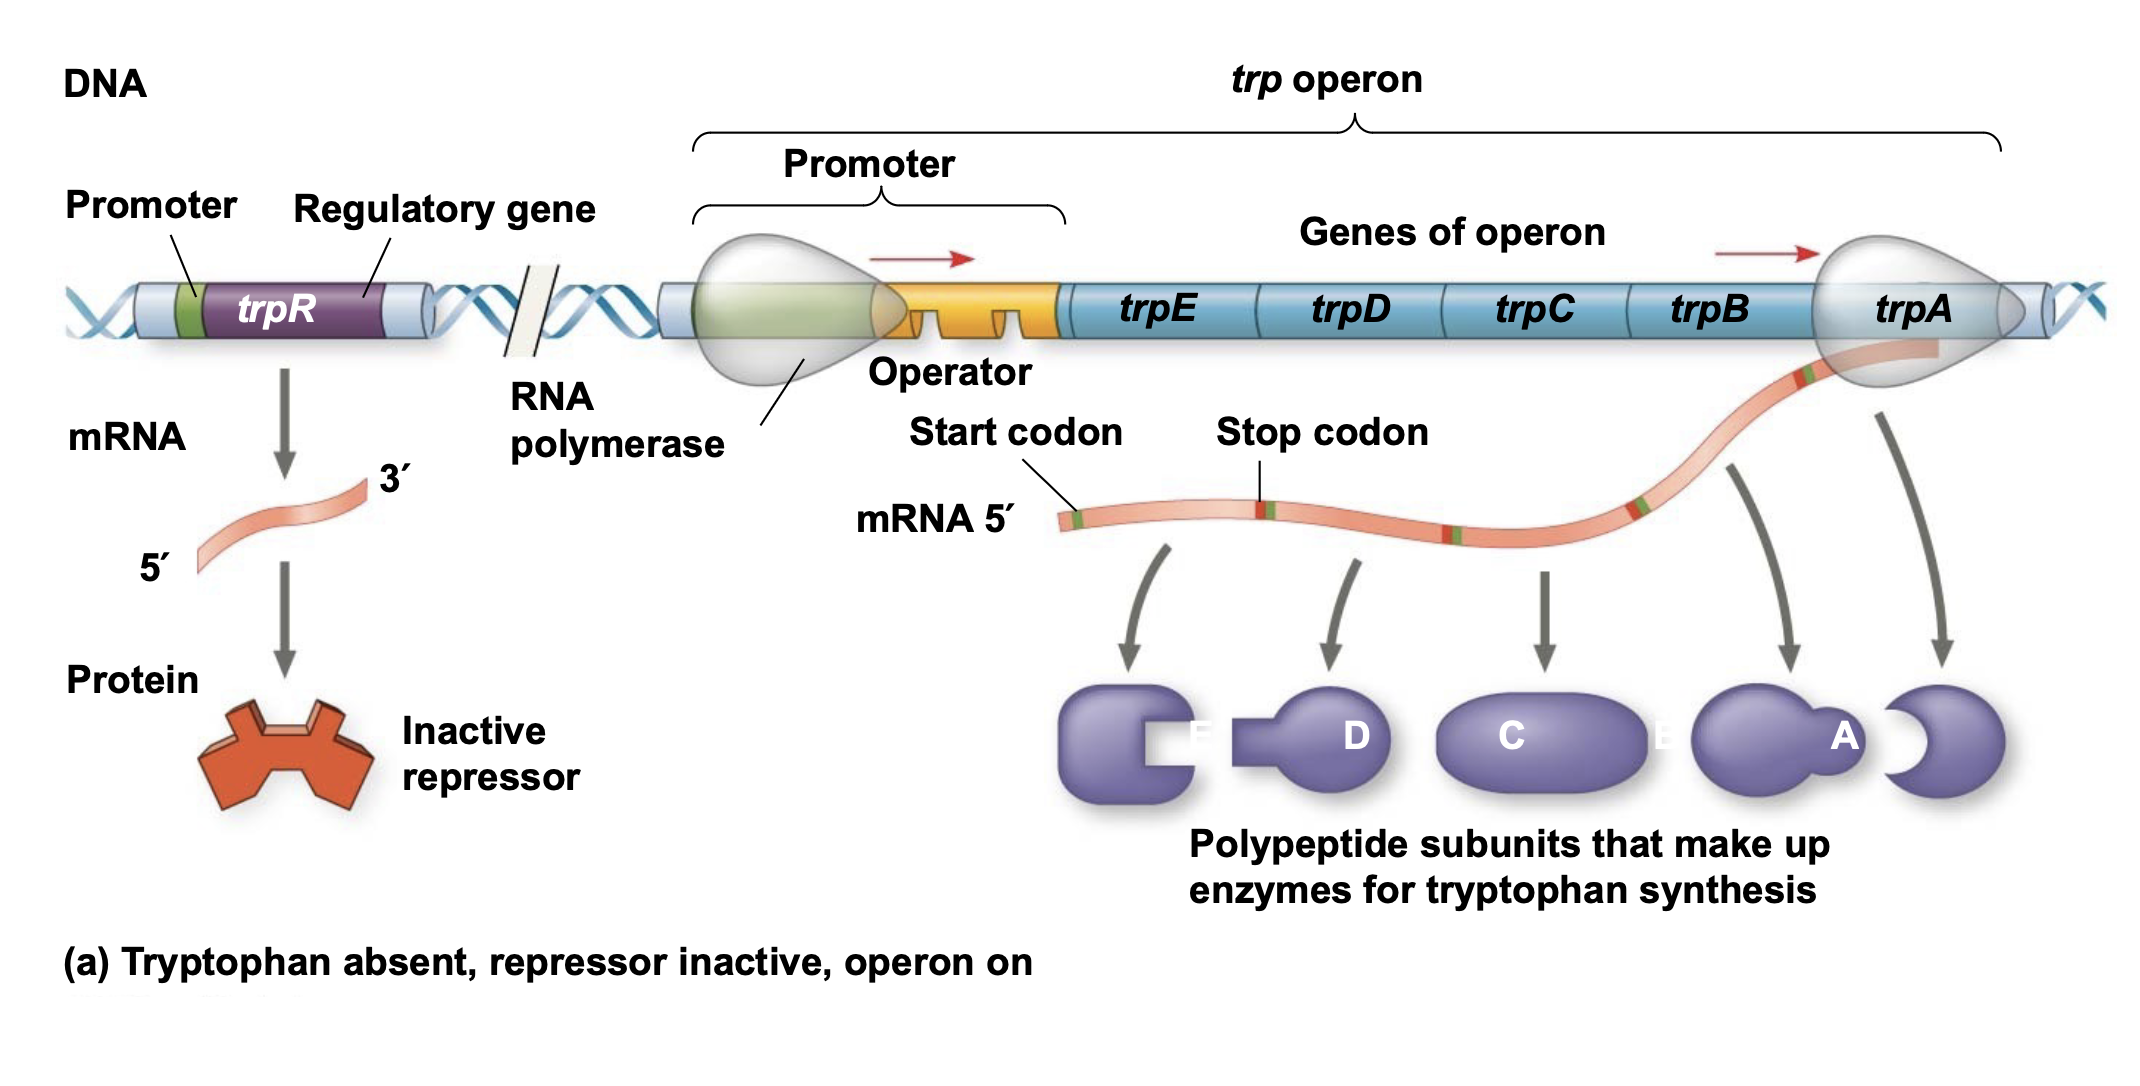 <p>.The trp repressor protein requires tryptophan to bind DNA \n and thus turn off transcription of the trp operon.</p><p>.When there is no (or very low) tryptophan, the repressor is \n inactive (cannot bind DNA), allowing RNA polymerase to bind \n the promoter and transcribe the genes in the trp operon.</p><p>.When tryptophan is present, it binds to and activates the trp \n repressor protein which then binds the operator and turns off \n transcription.</p><p>.Thus the trp operon is turned off (repressed) if tryptophan levels are high and turned on when tryptophan levels are low.</p>